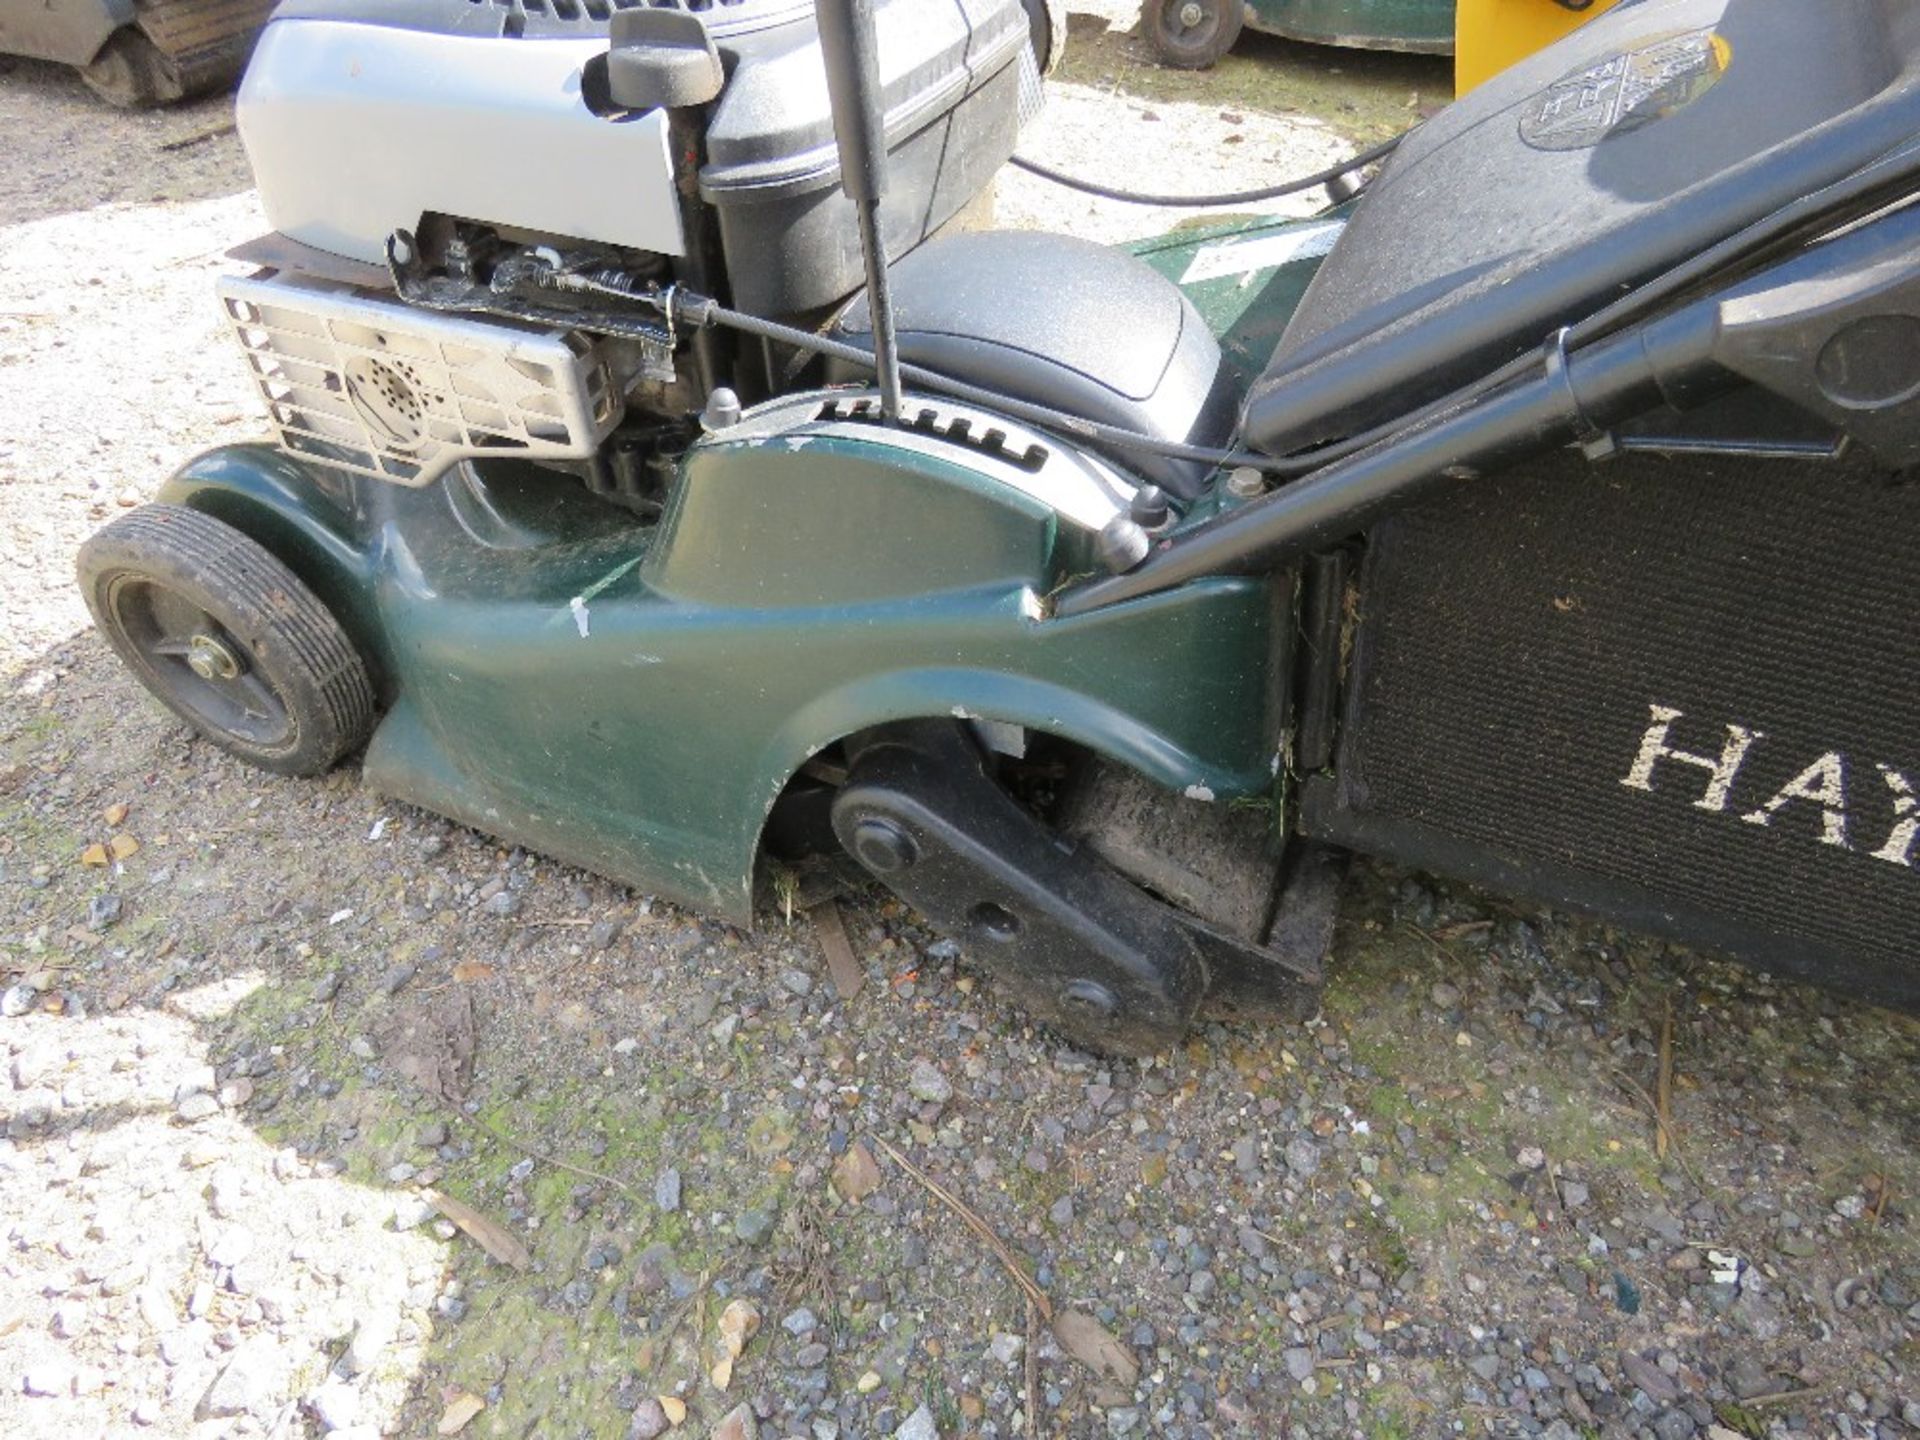 HAYTER HARRIER 41 ROLLER MOWER WITH COLLECTOR. SEEN RUNNING BUT NO DRIVE?? ....THIS LOT IS SOLD UNDE - Image 4 of 4